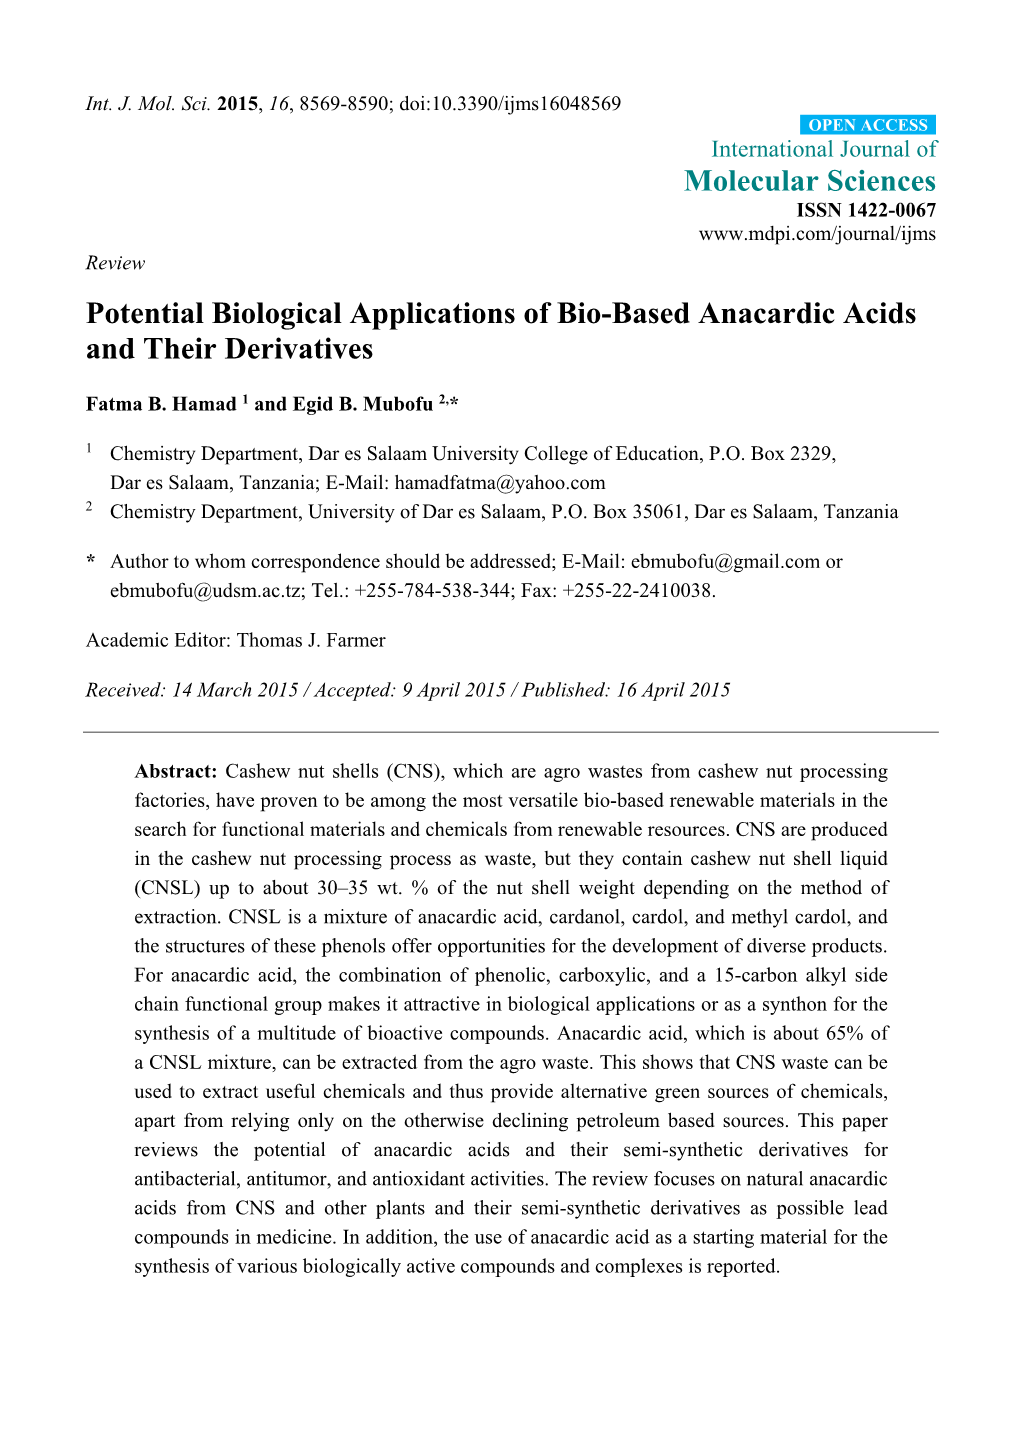 Potential Biological Applications of Bio-Based Anacardic Acids and Their Derivatives